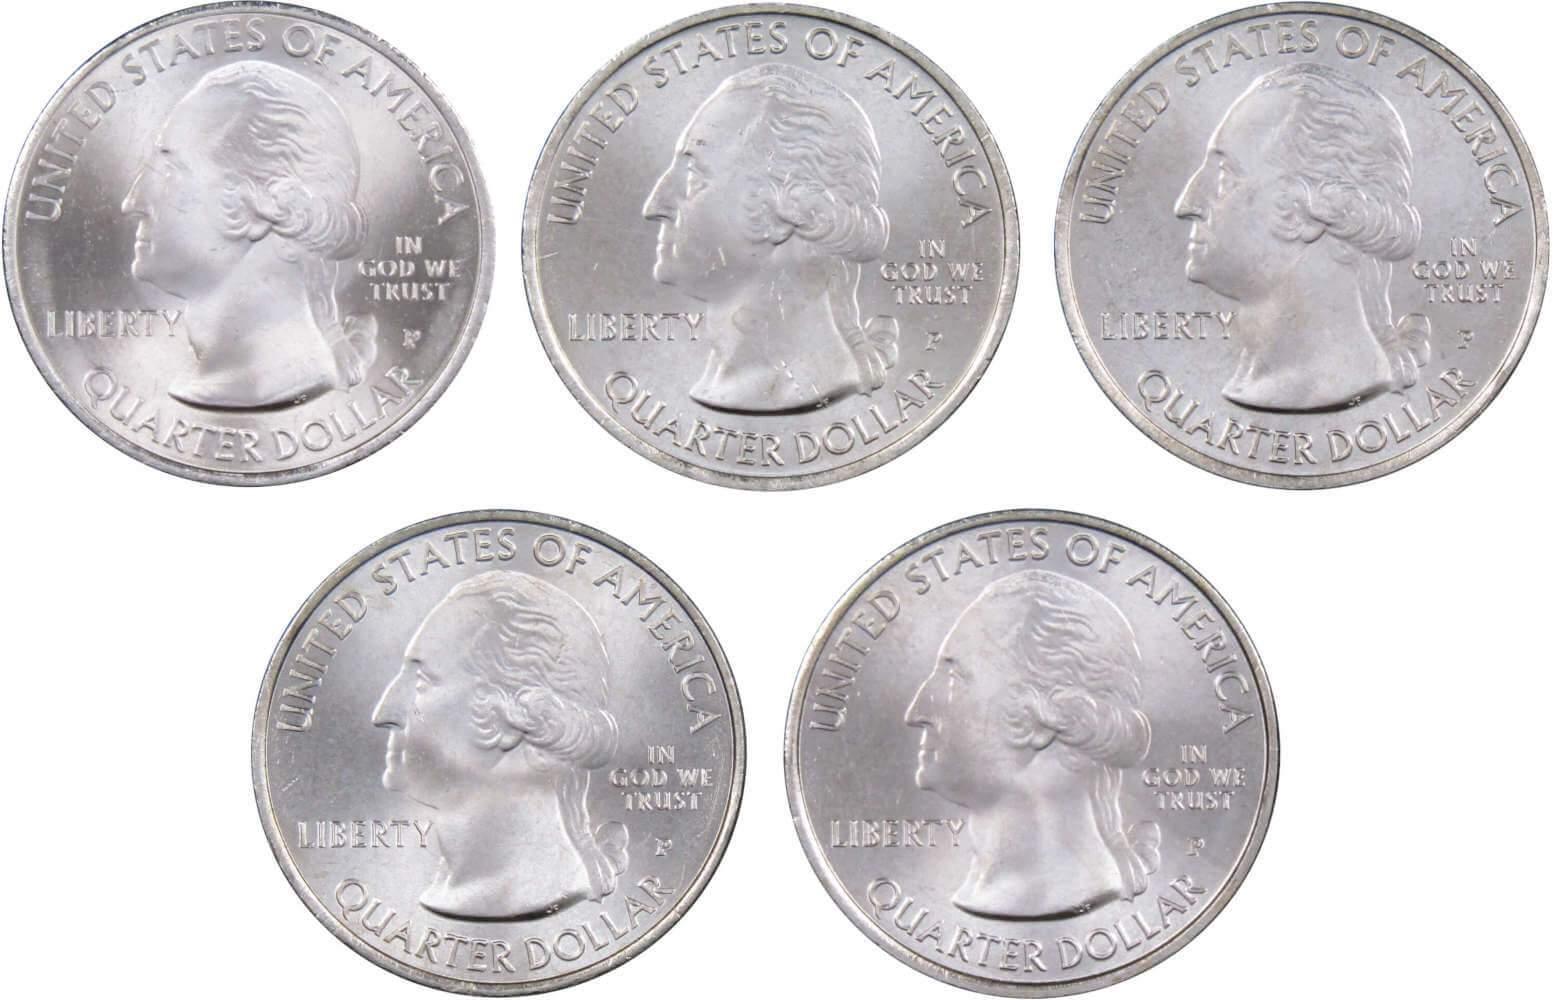 2013 P National Park Quarter 5 Coin Set Uncirculated Mint State 25c Collectible